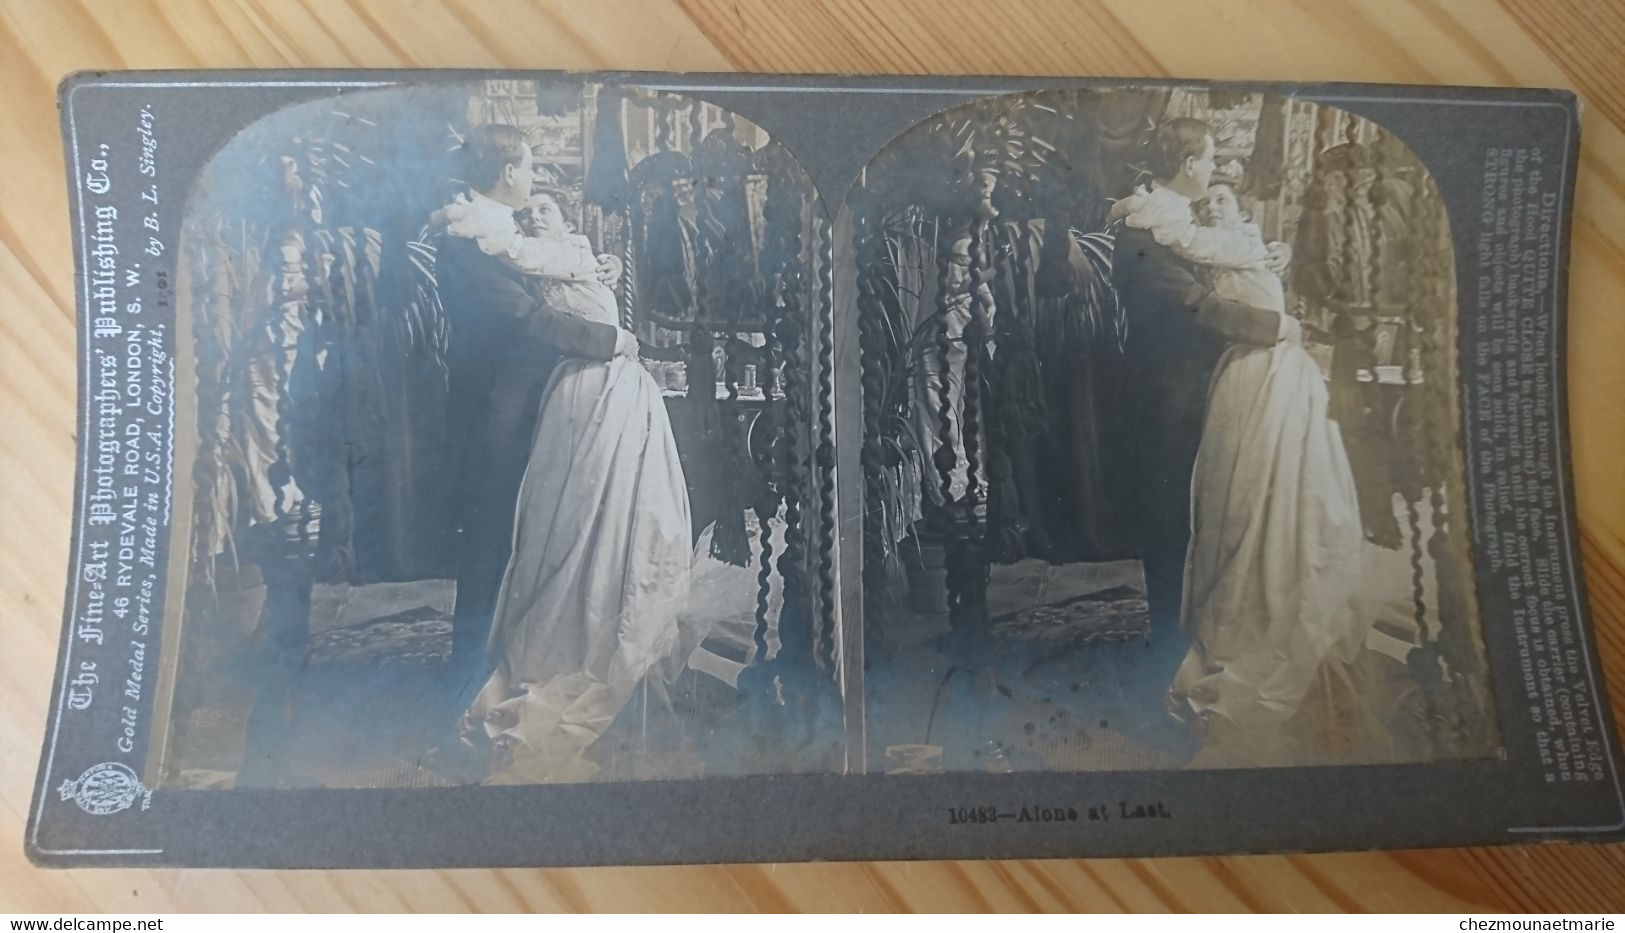 COUPLE QUI S ENLACE - PHOTO STEREO LONDRES - Stereoscopic